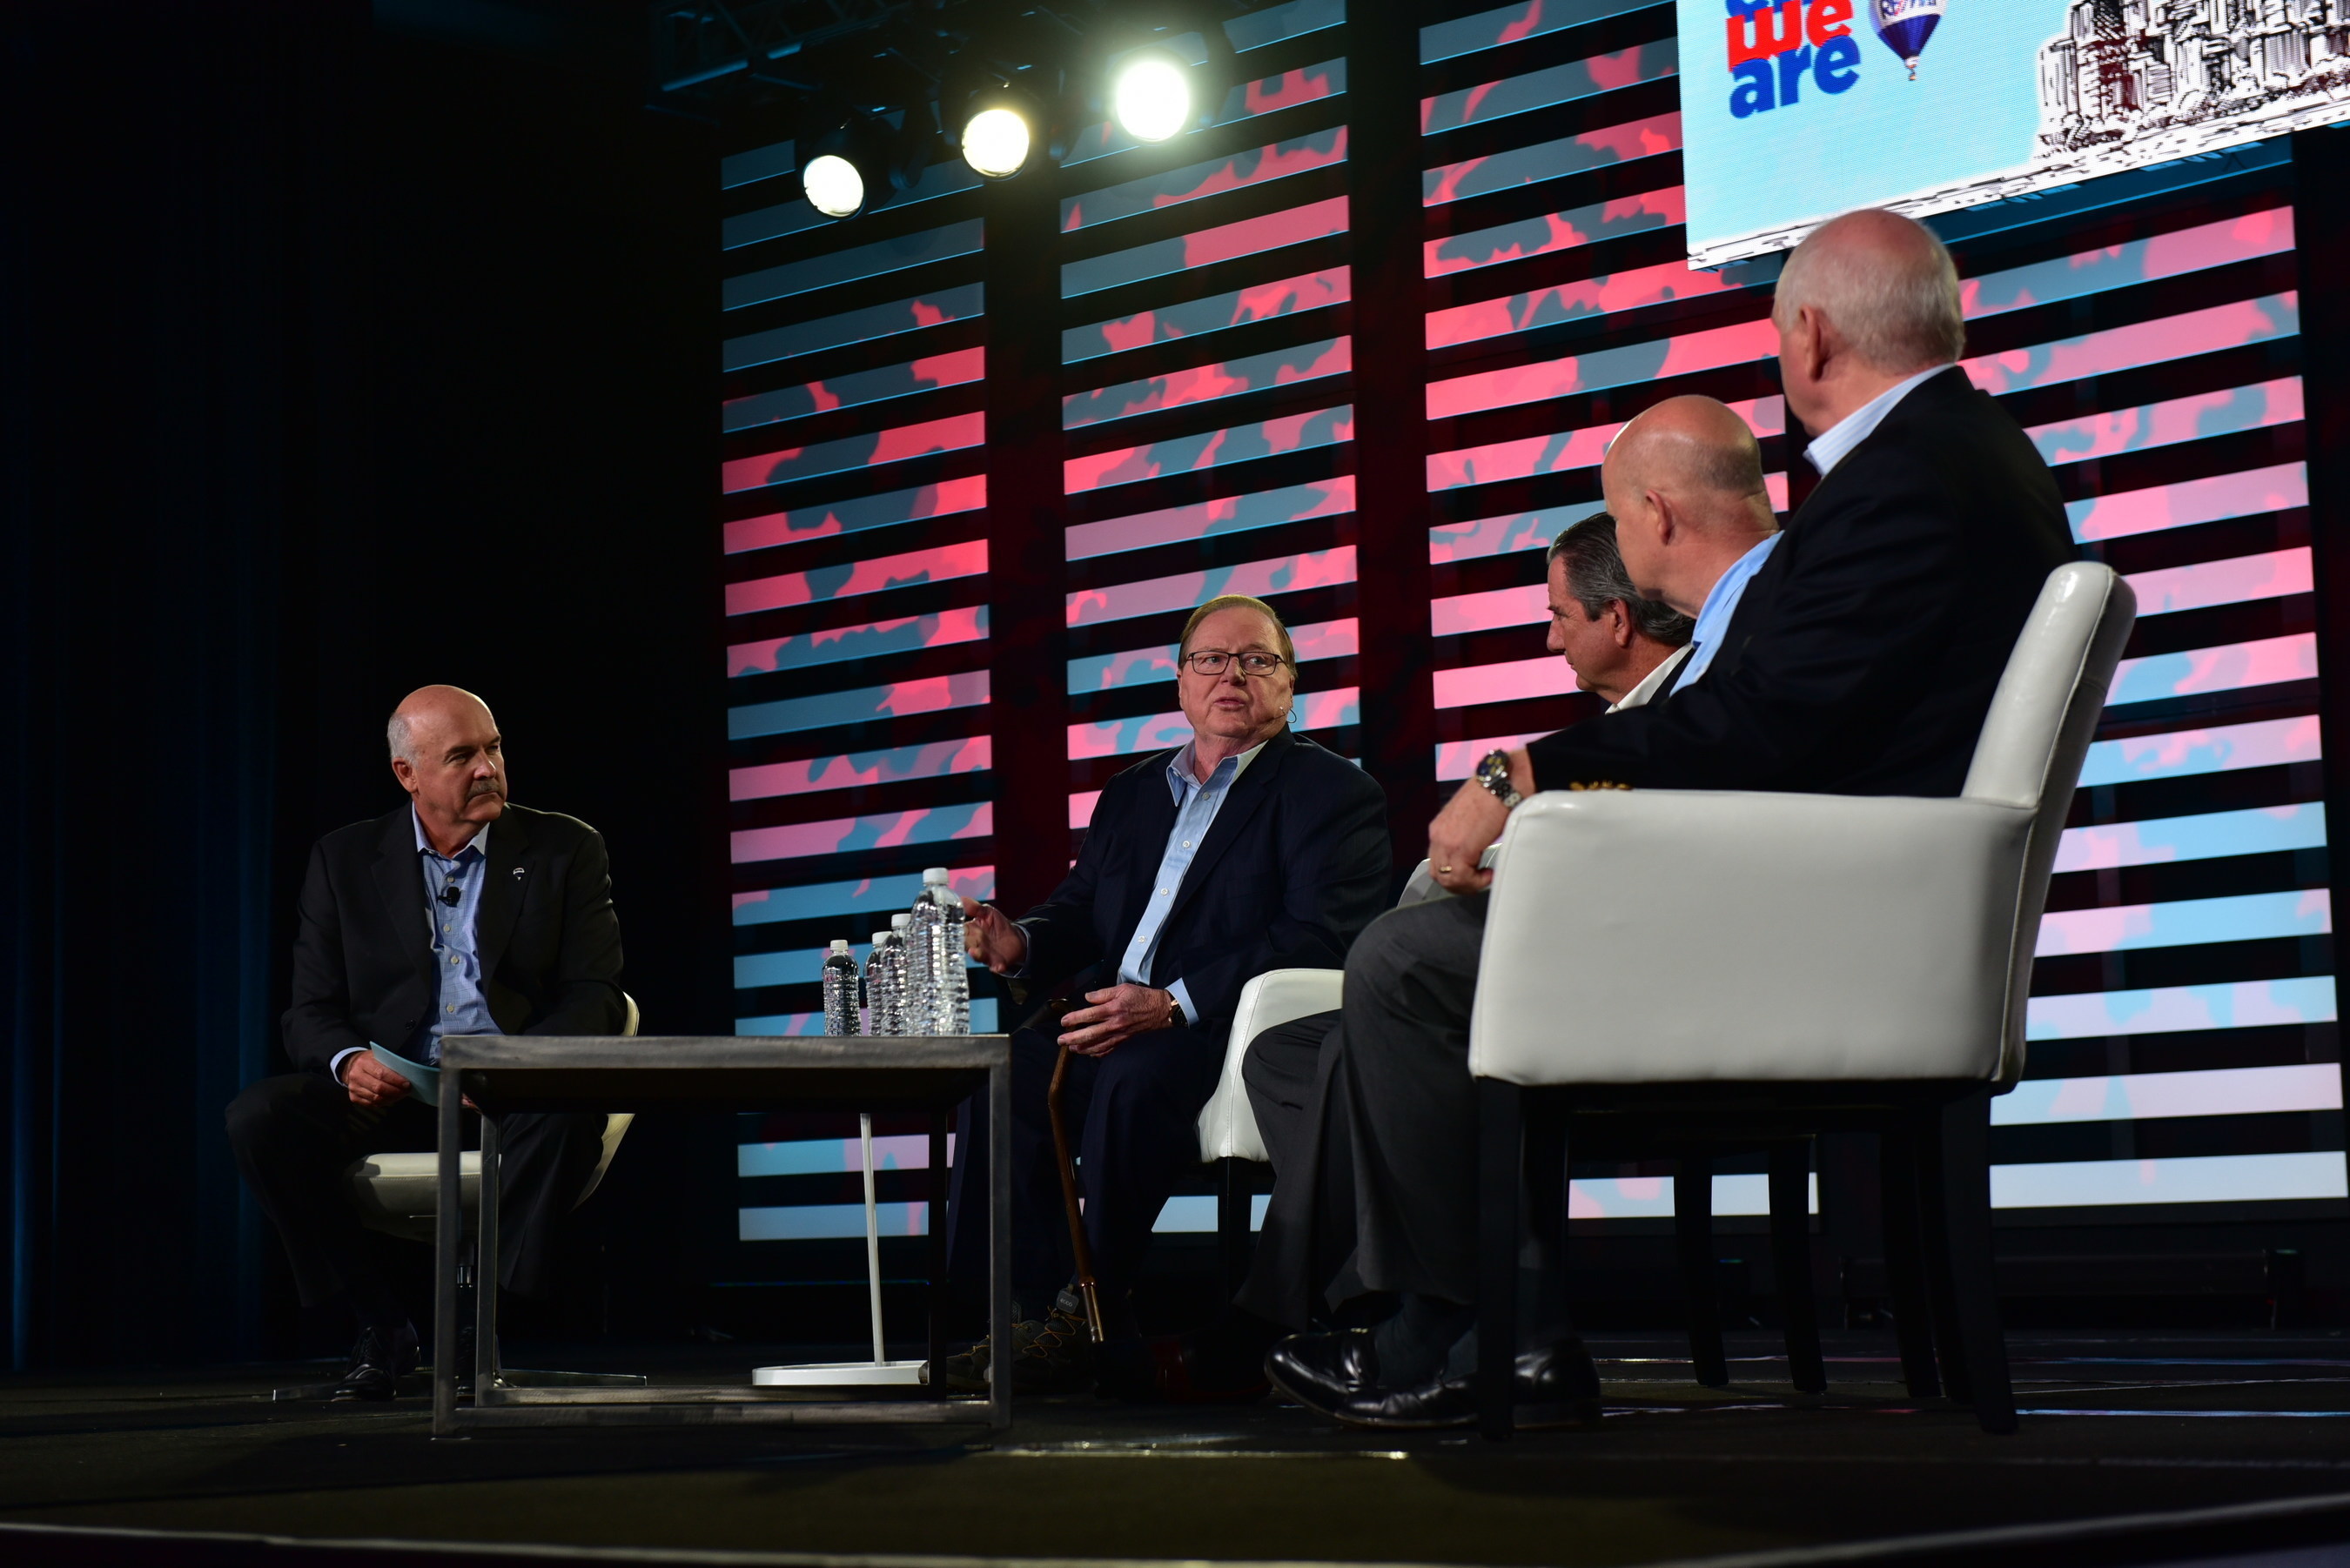 At the annual RE/MAX Broker Owner Conference in Chicago, RE/MAX CEO, Chairman of the Board and Co-Founder Dave Liniger, Real Trends President Steve Murray, Inman News Founder Brad Inman and RISMedia Founder and CEO John Featherston, gathered on the same stage together for the first time.